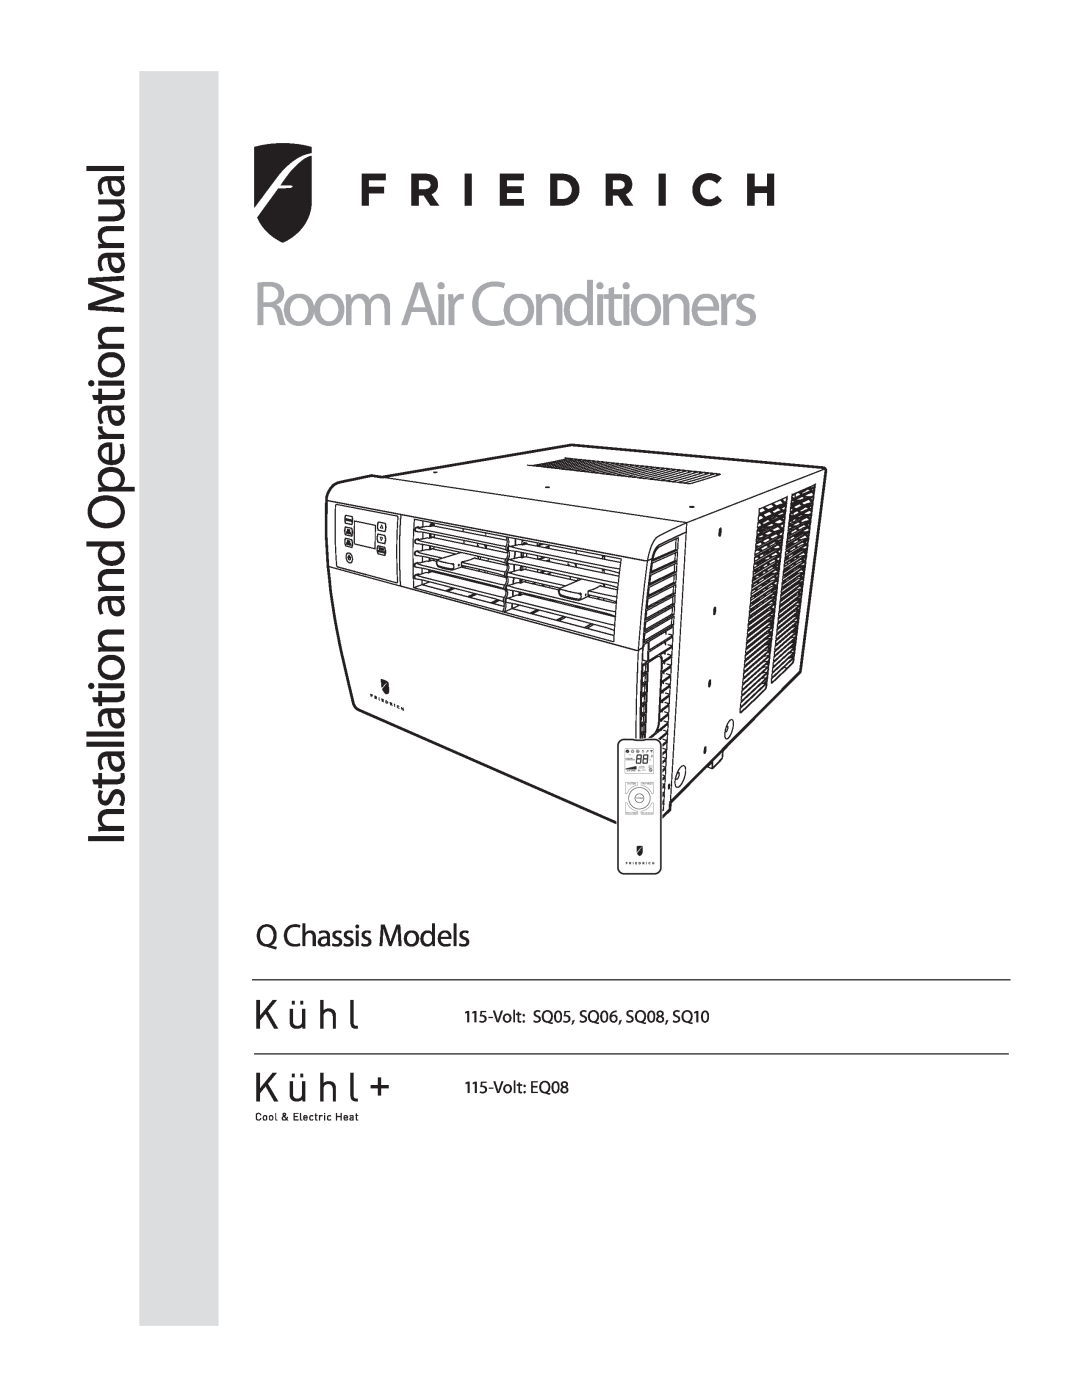 Friedrich SQ06, SQ10, SQ05, SQ08 operation manual RoomAirConditioners, Q Chassis Models, System, Fan Mode, Fan Speed 